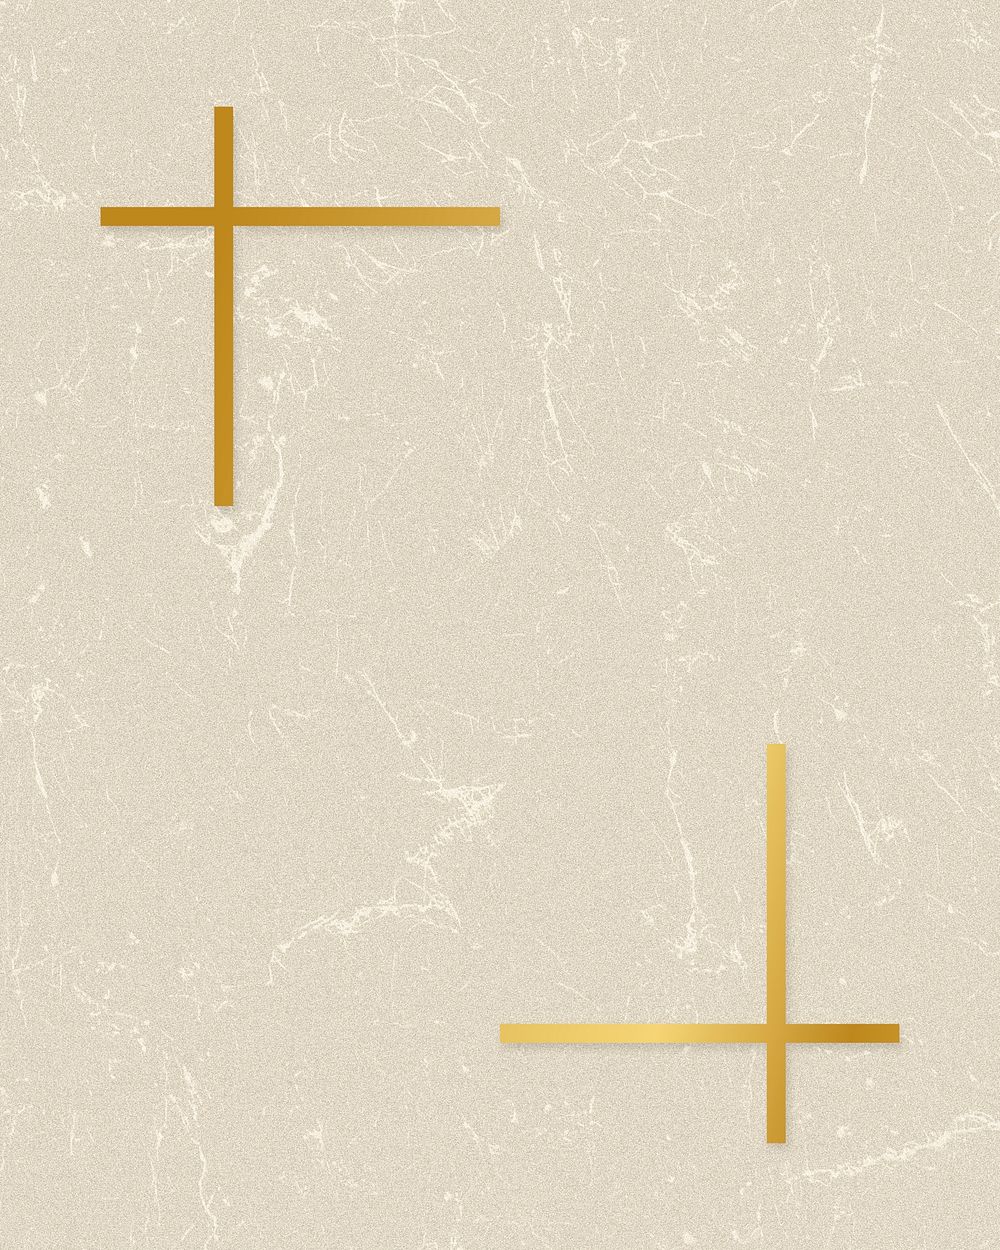 Gold frame on a beige paper textured background